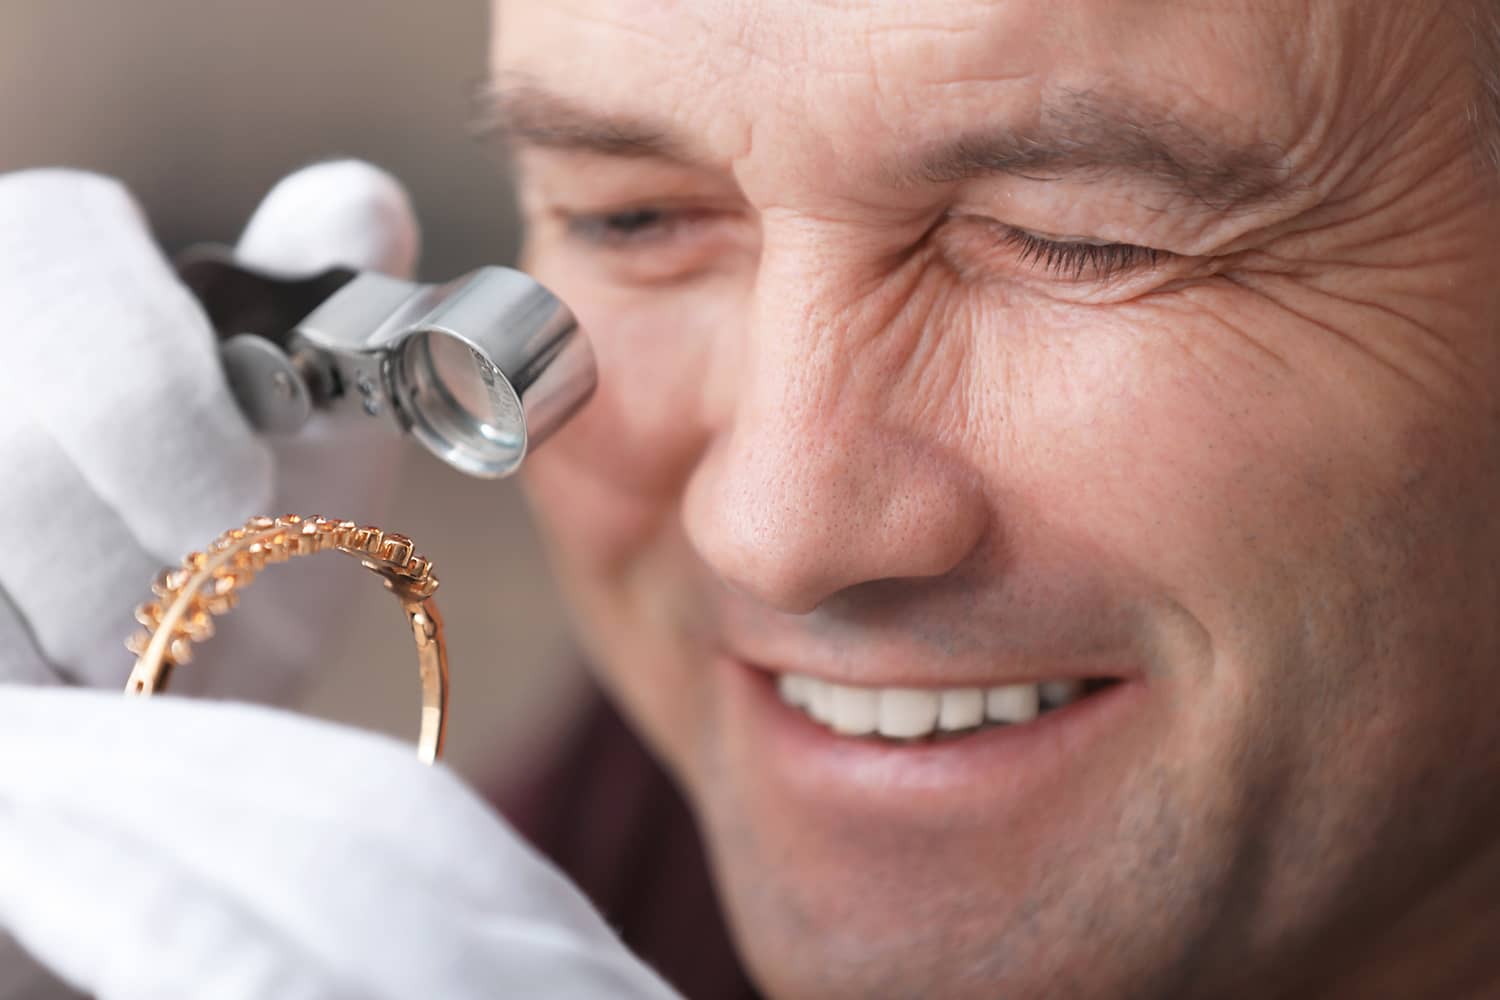 Close up photograph of person looking at jewelry through jeweler's loupe